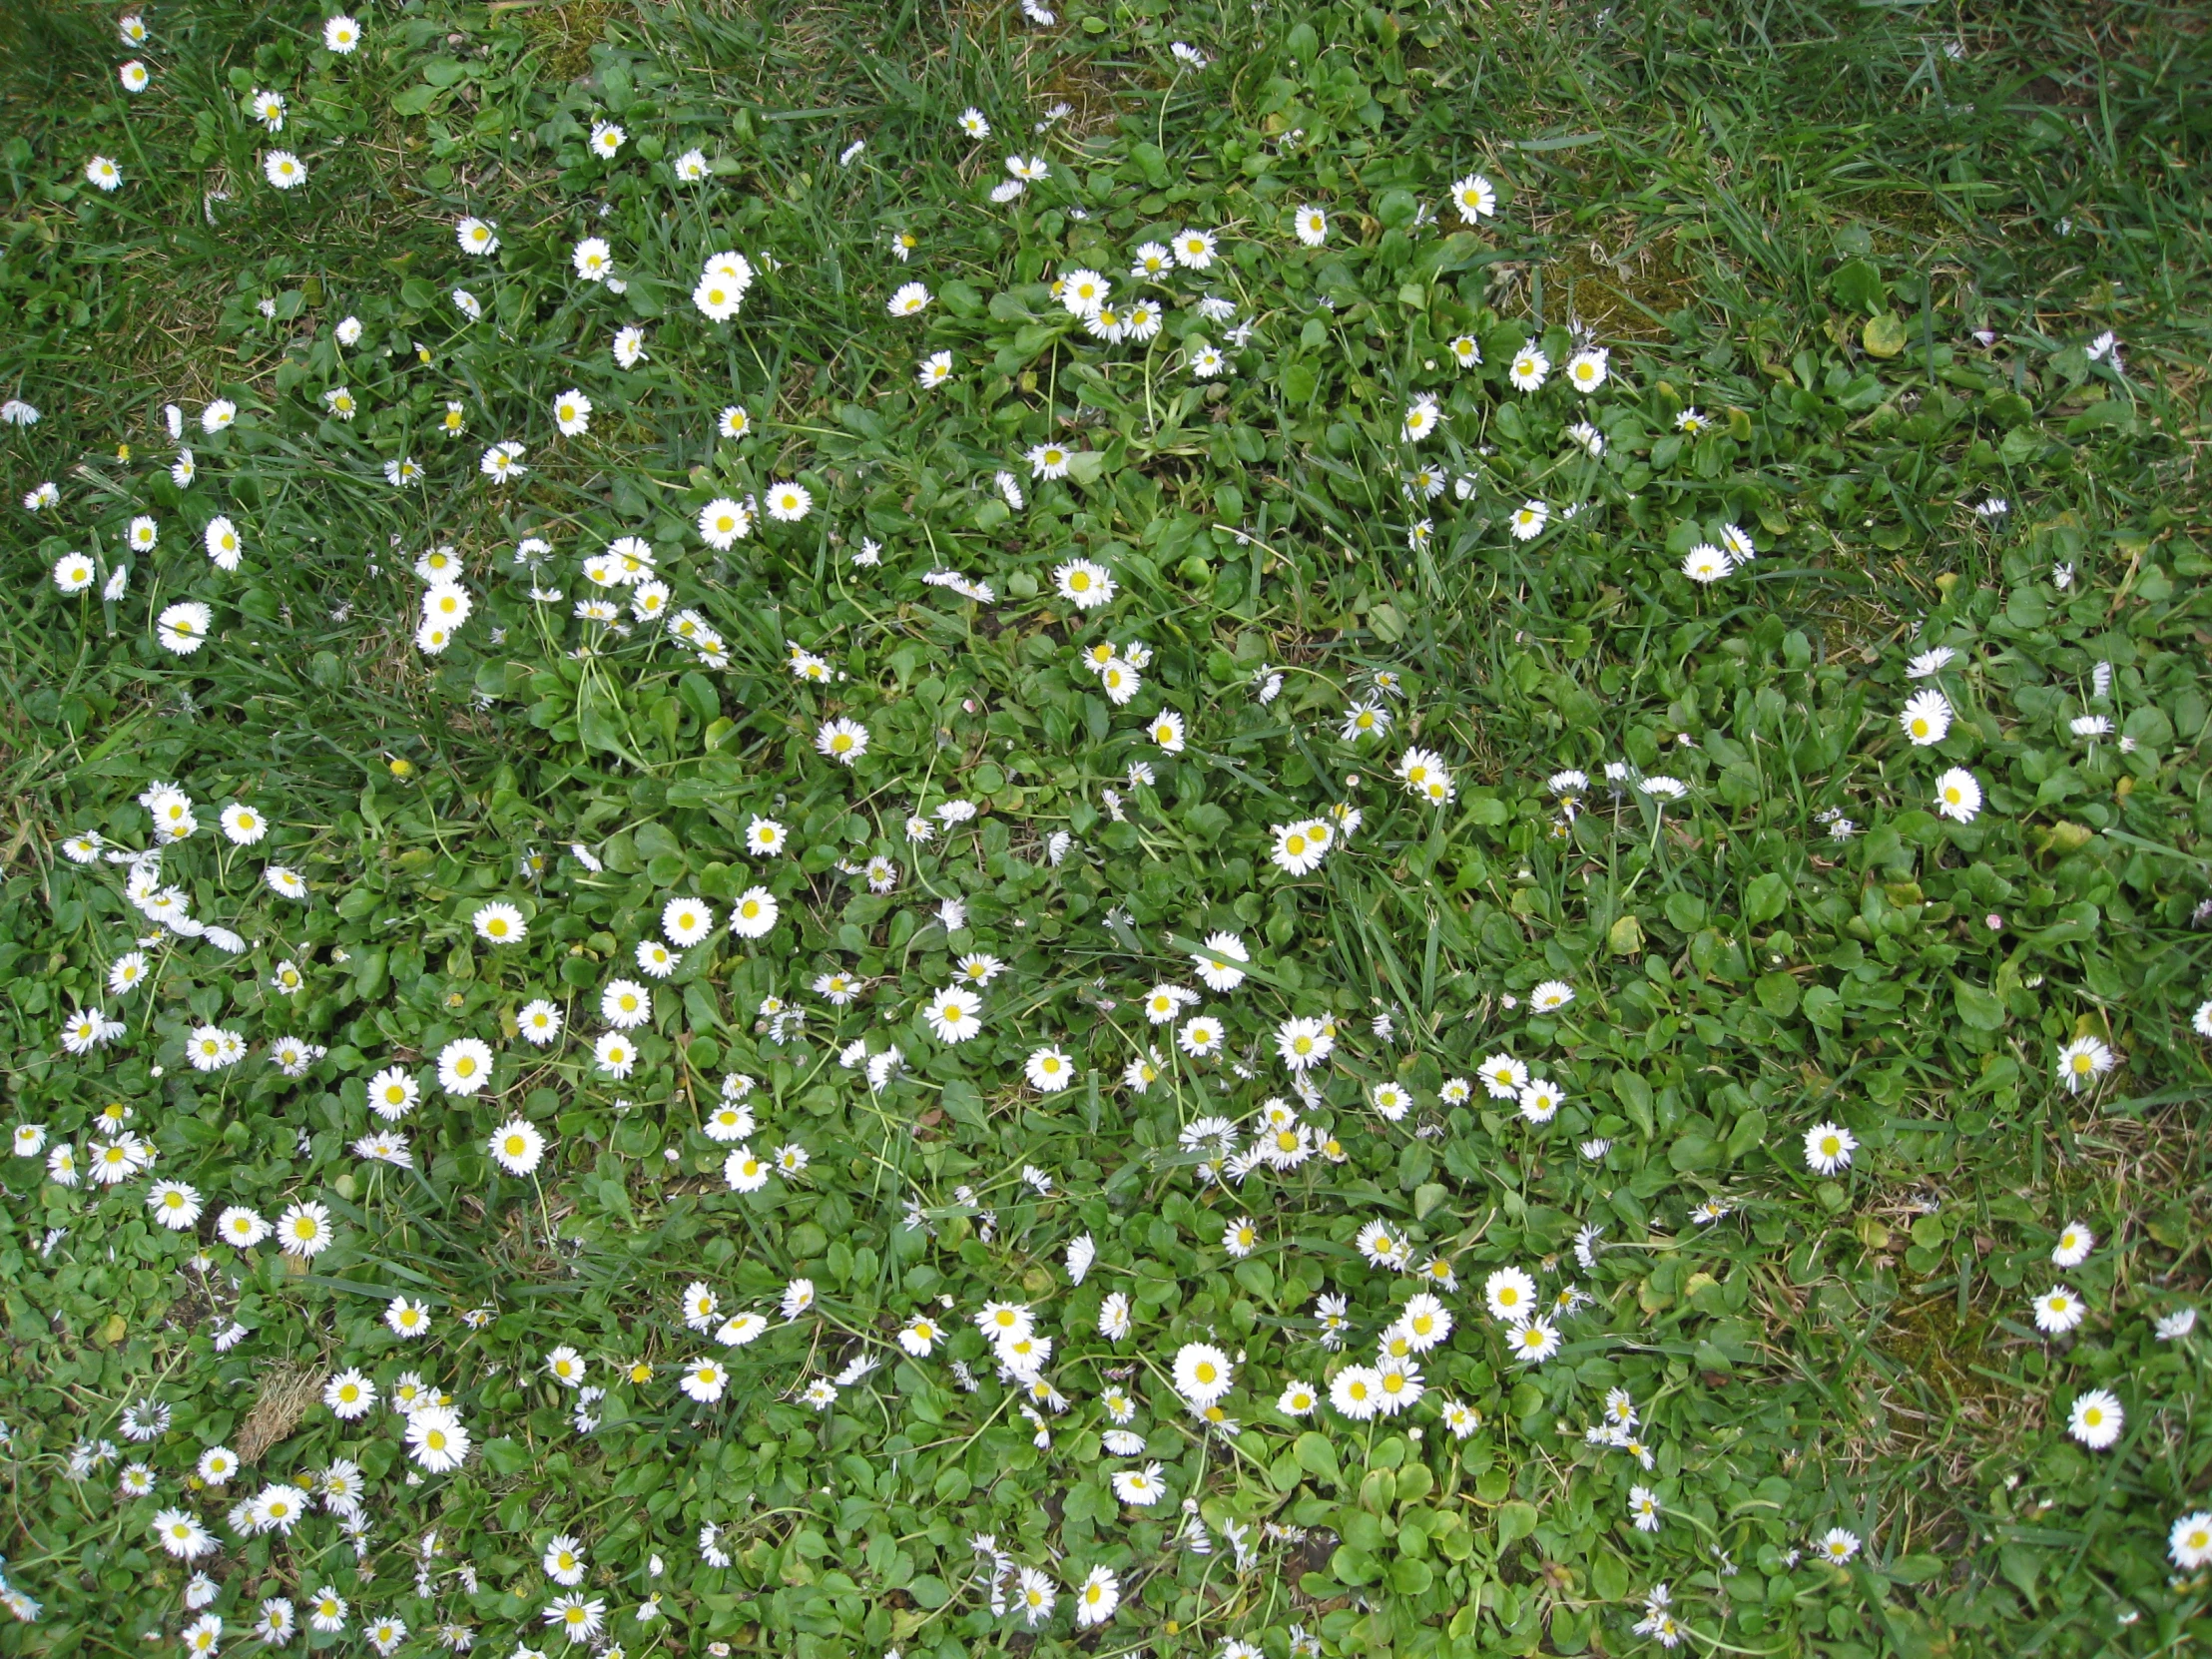 green grass with white daisies growing in it